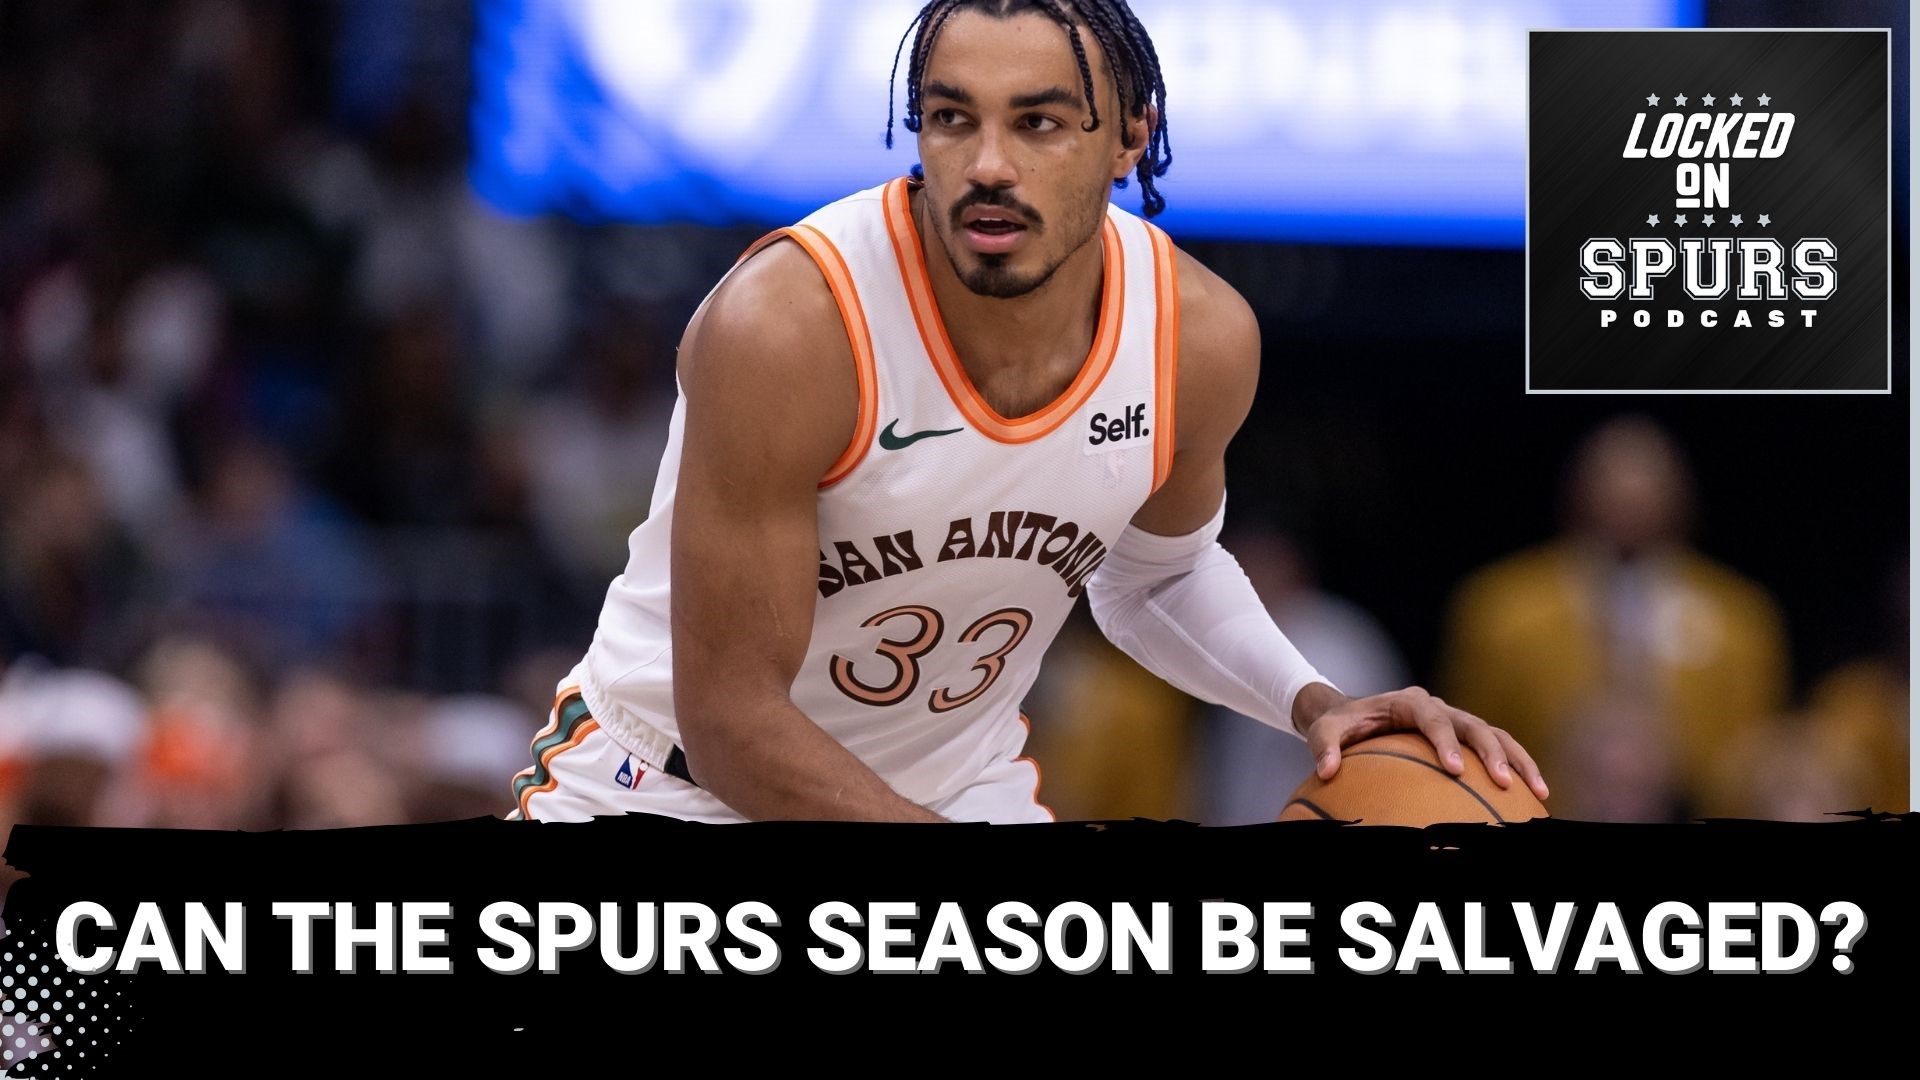 Also, Locked On Spurs fan comments and more.